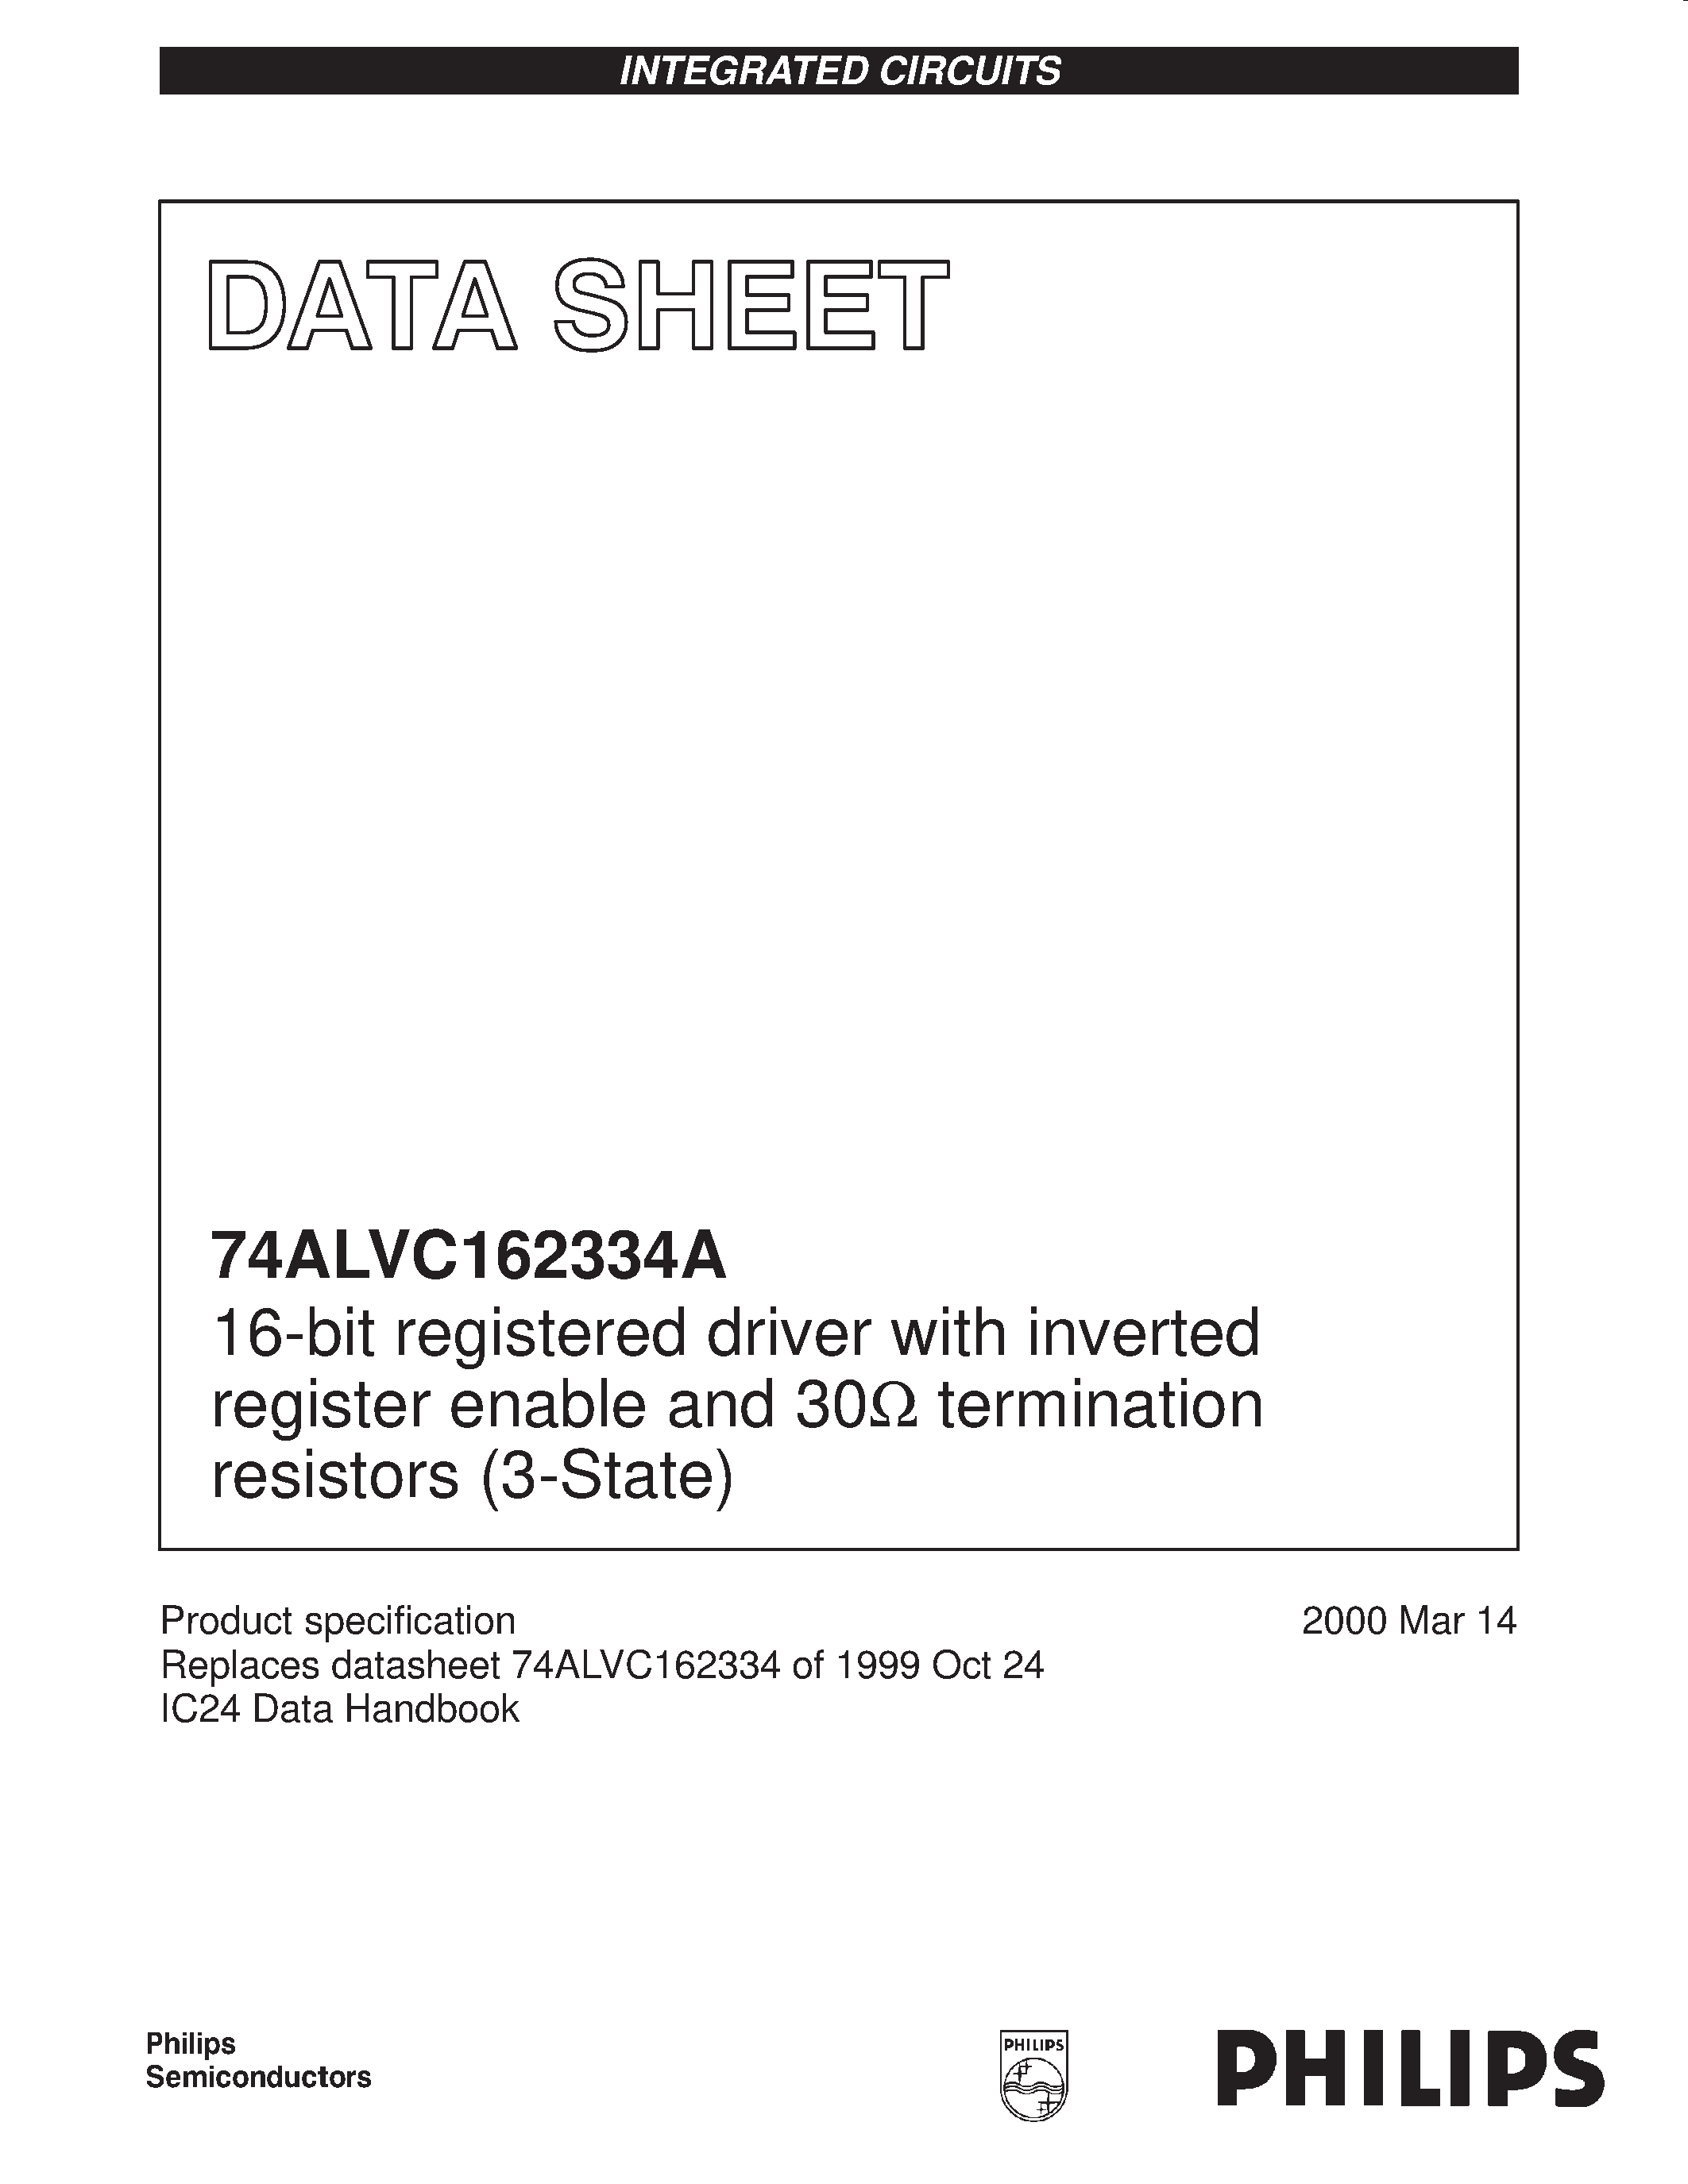 Datasheet 74ALVC162334ADGG - 16-bit registered driver with inverted register enable and 30ohm termination resistors 3-State page 1